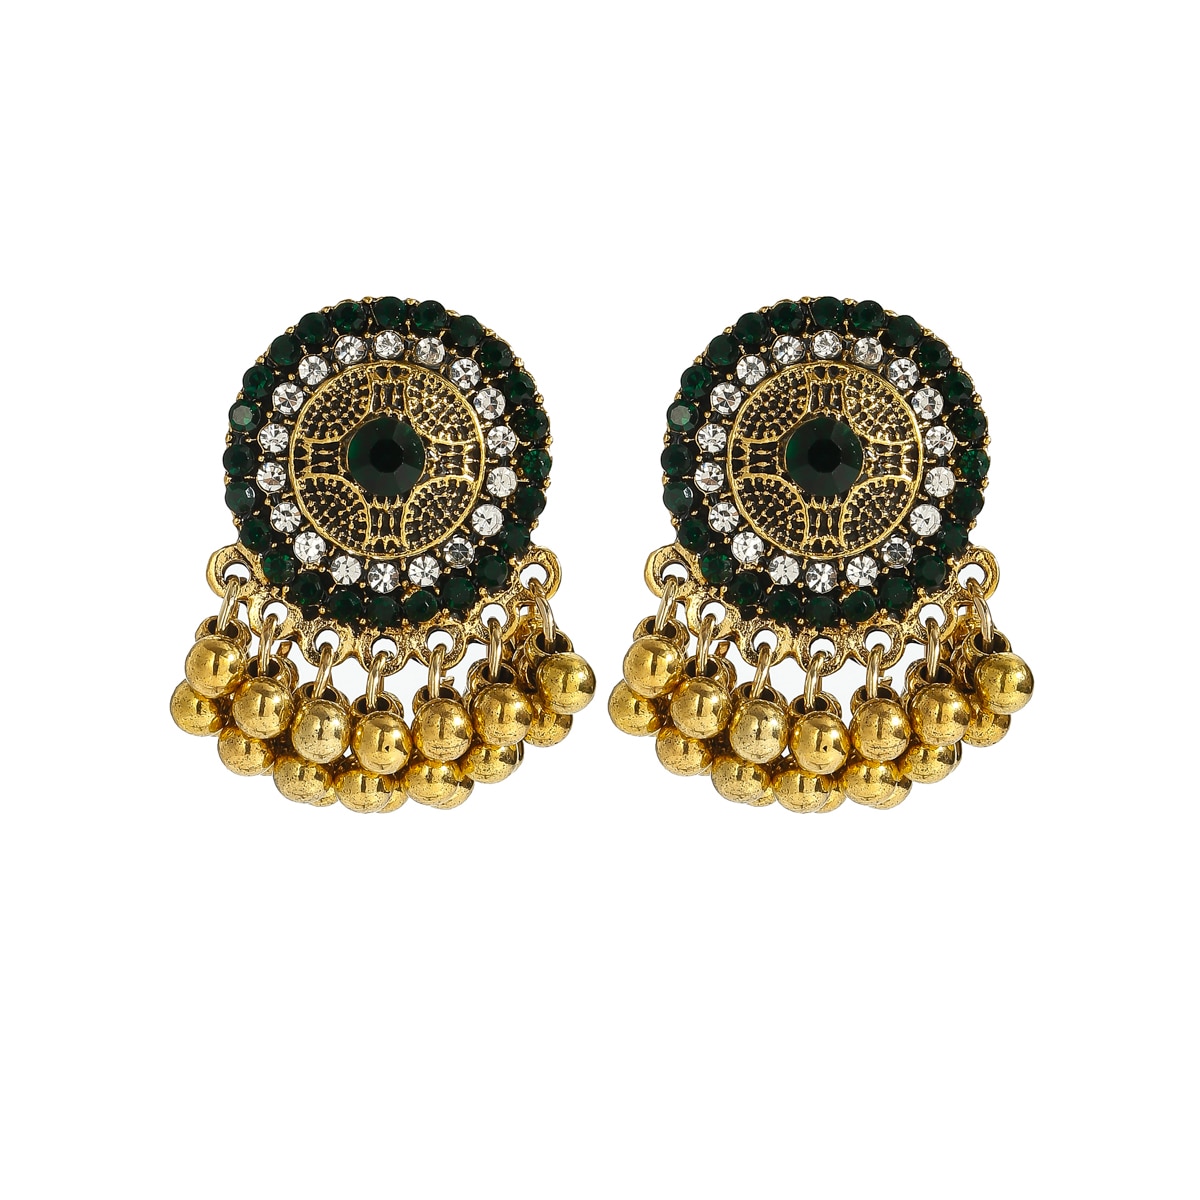 Classic-Ethnic-CZ-Indian-Earrings-For-Women-Gypsy-Round-Alloy-Jhumka-Earring-Fashion-Jewelry-Orecchi-1005004770706519-6